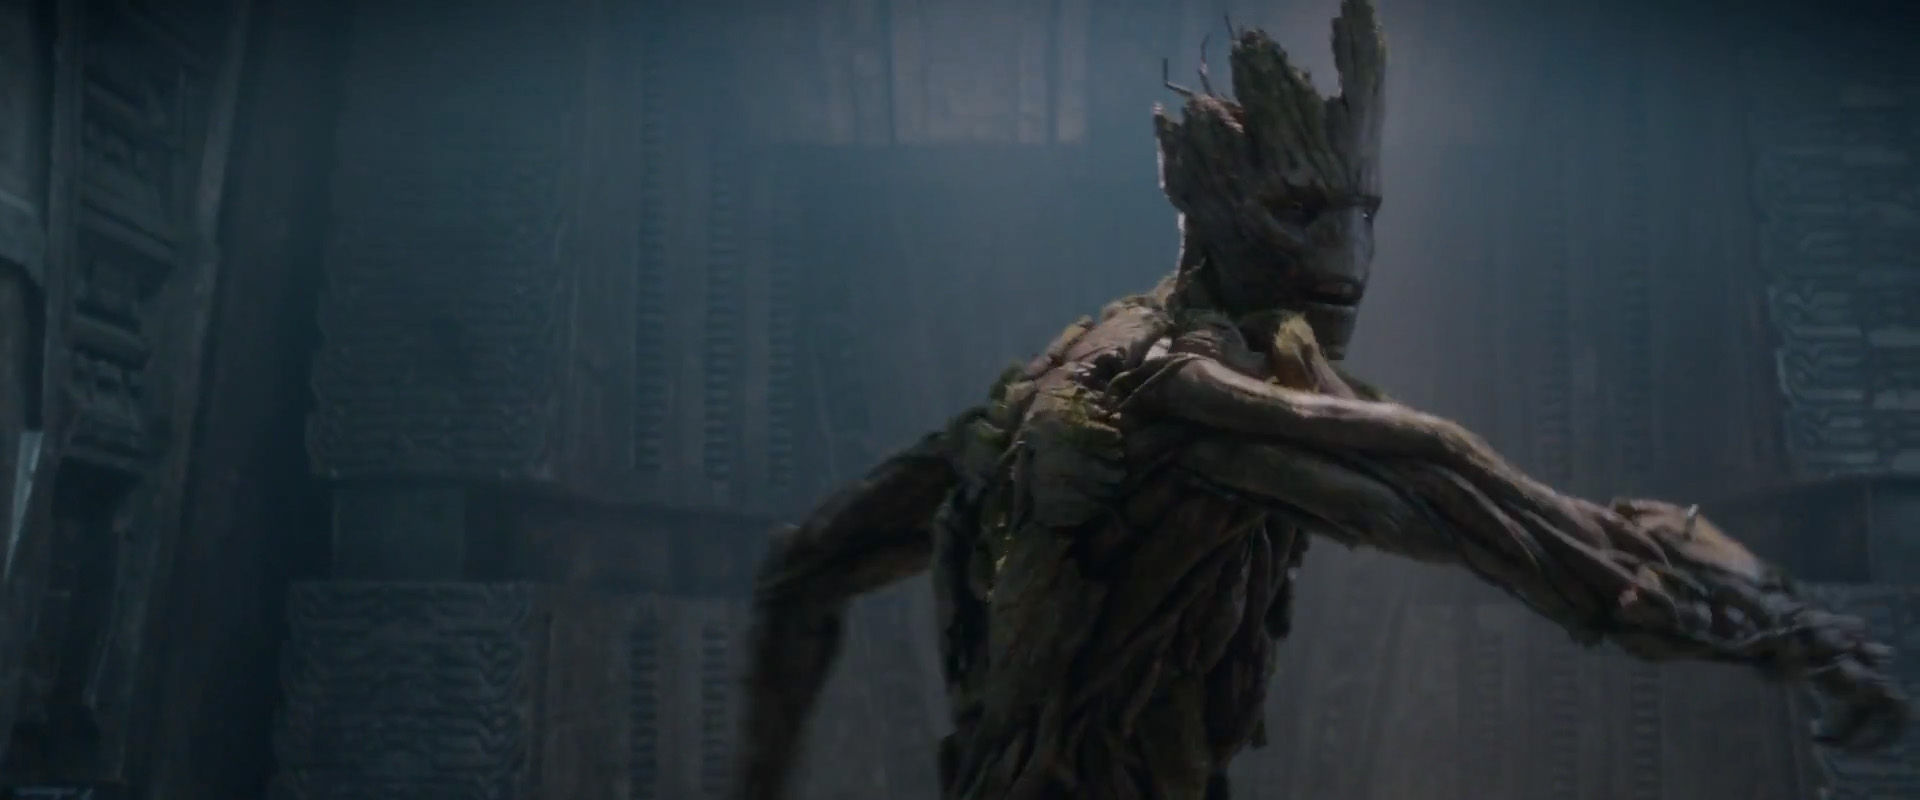 By Stephen Ments Off On Guardians Of The Galaxy Groot Wallpaper